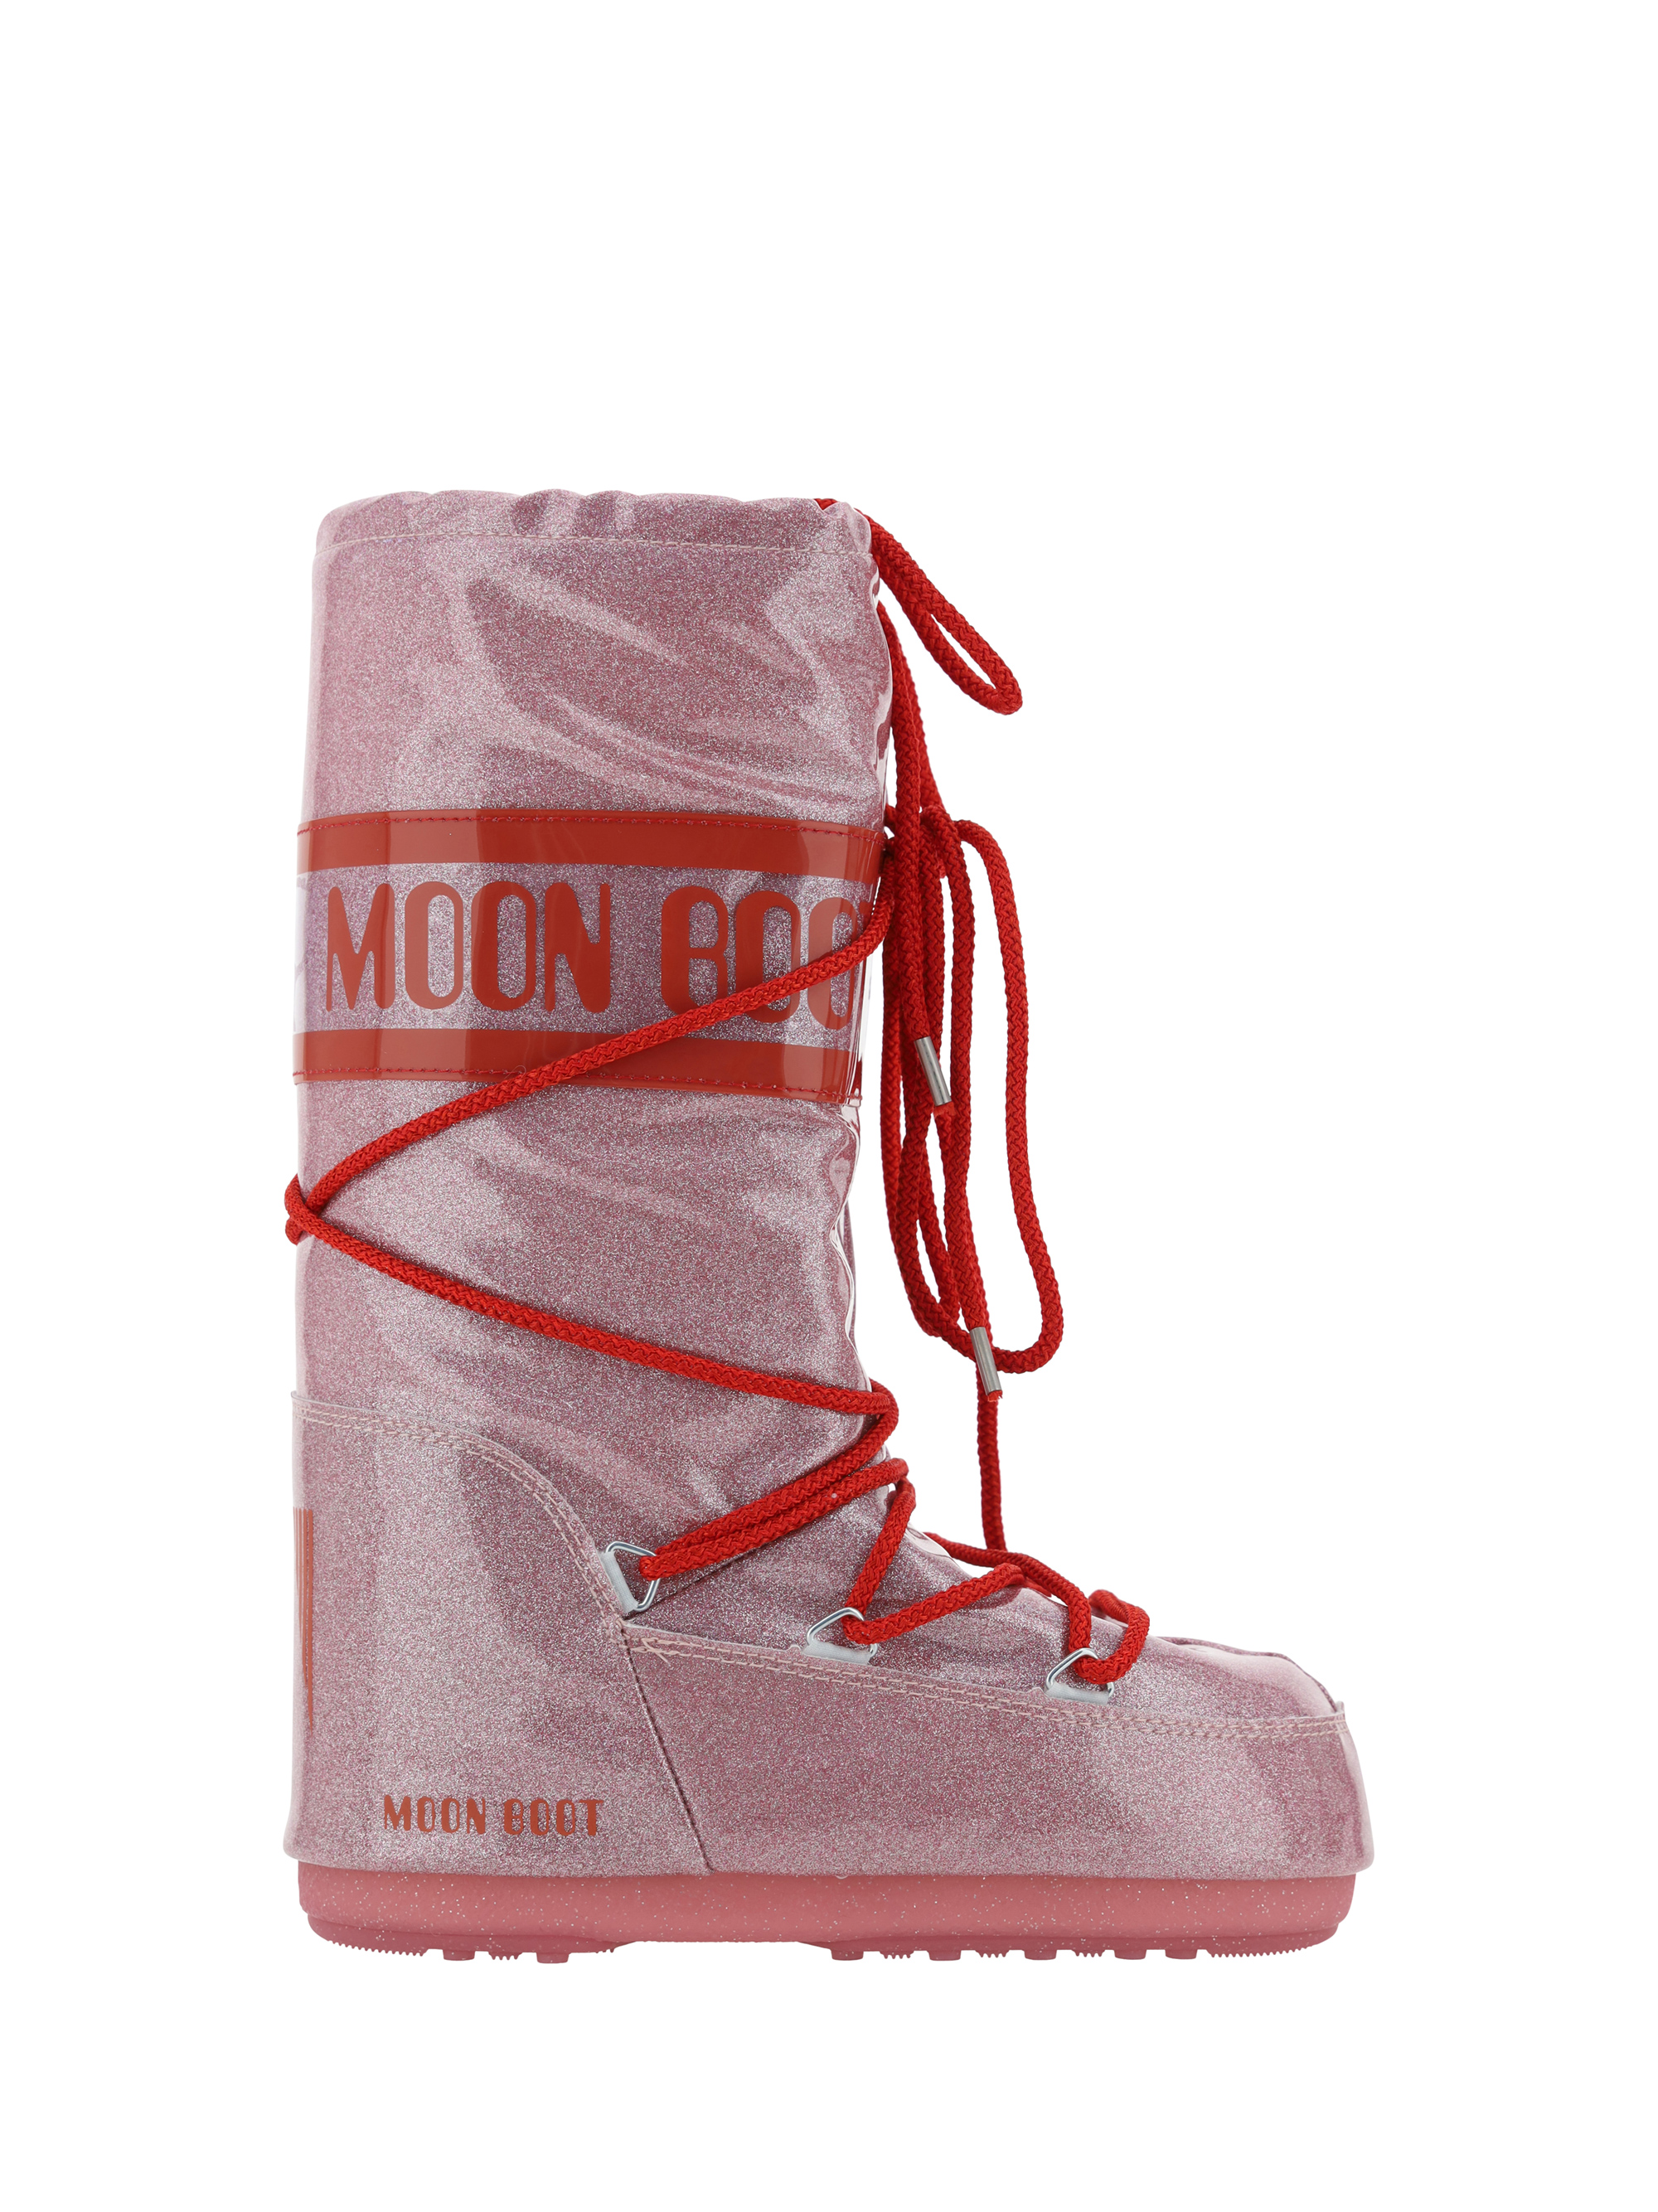 MOON BOOT ICON GLITTER BOOTS